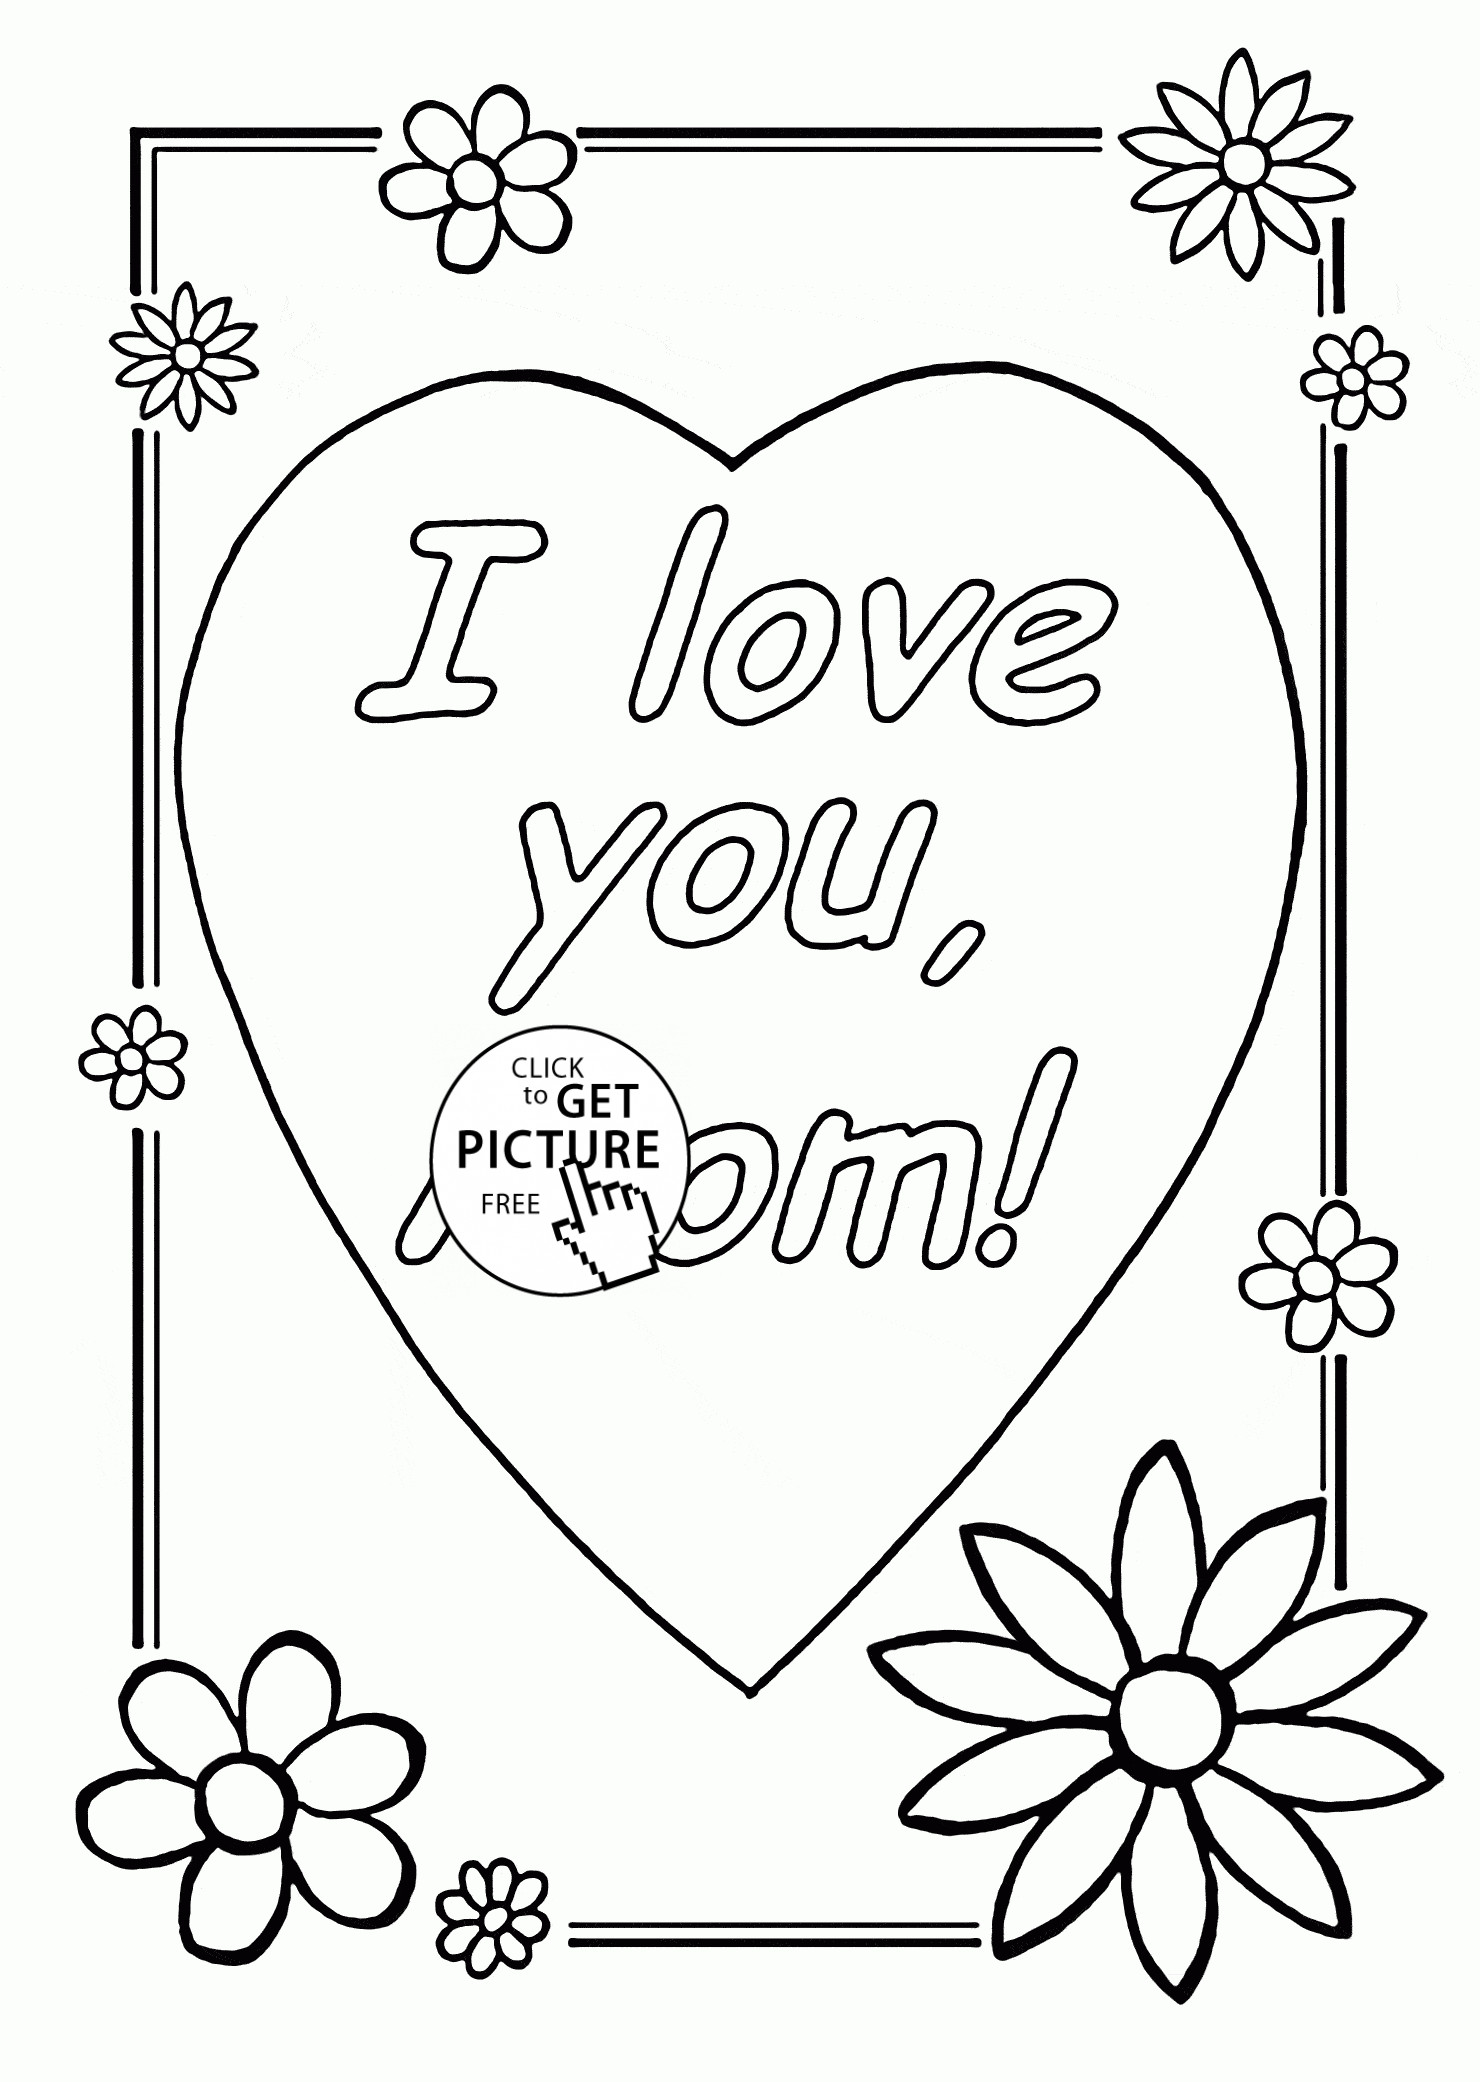 Mom Coloring Pages
 I Love You Mom Mother s Day coloring page for kids